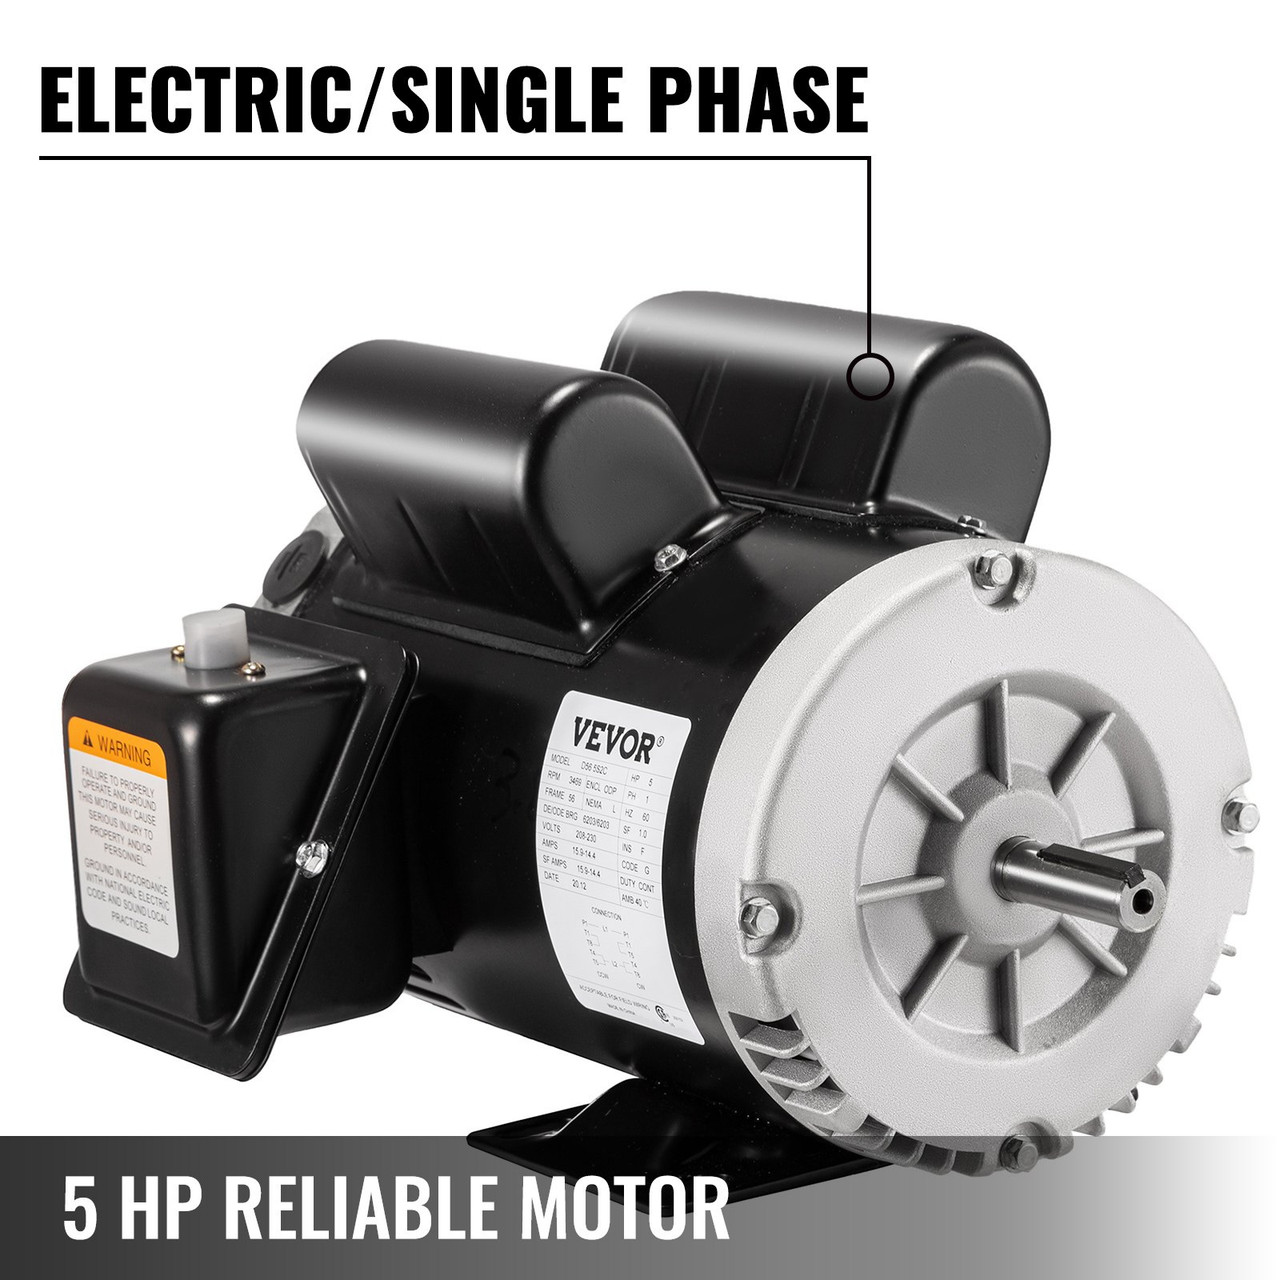 5 Hp Electric Motor 3.1 KW Rated Speed 3450 RPM Single Phase Motor AC 208-230V Air Compressor Motor Suit for Home and Small Shop Air Compressors